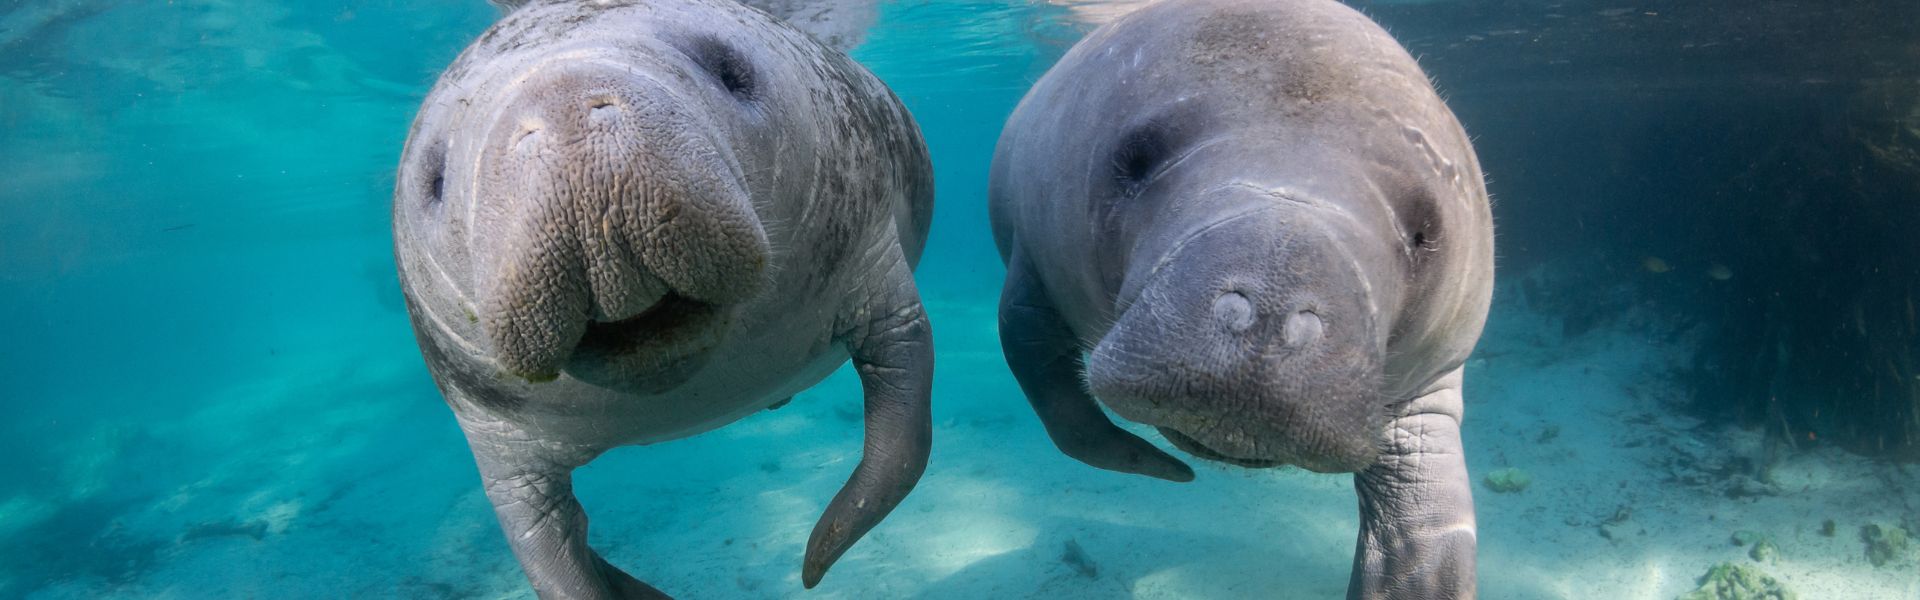 Manatees looking at camera Discover Crystal River Campaign scrolling banner 28Dec22